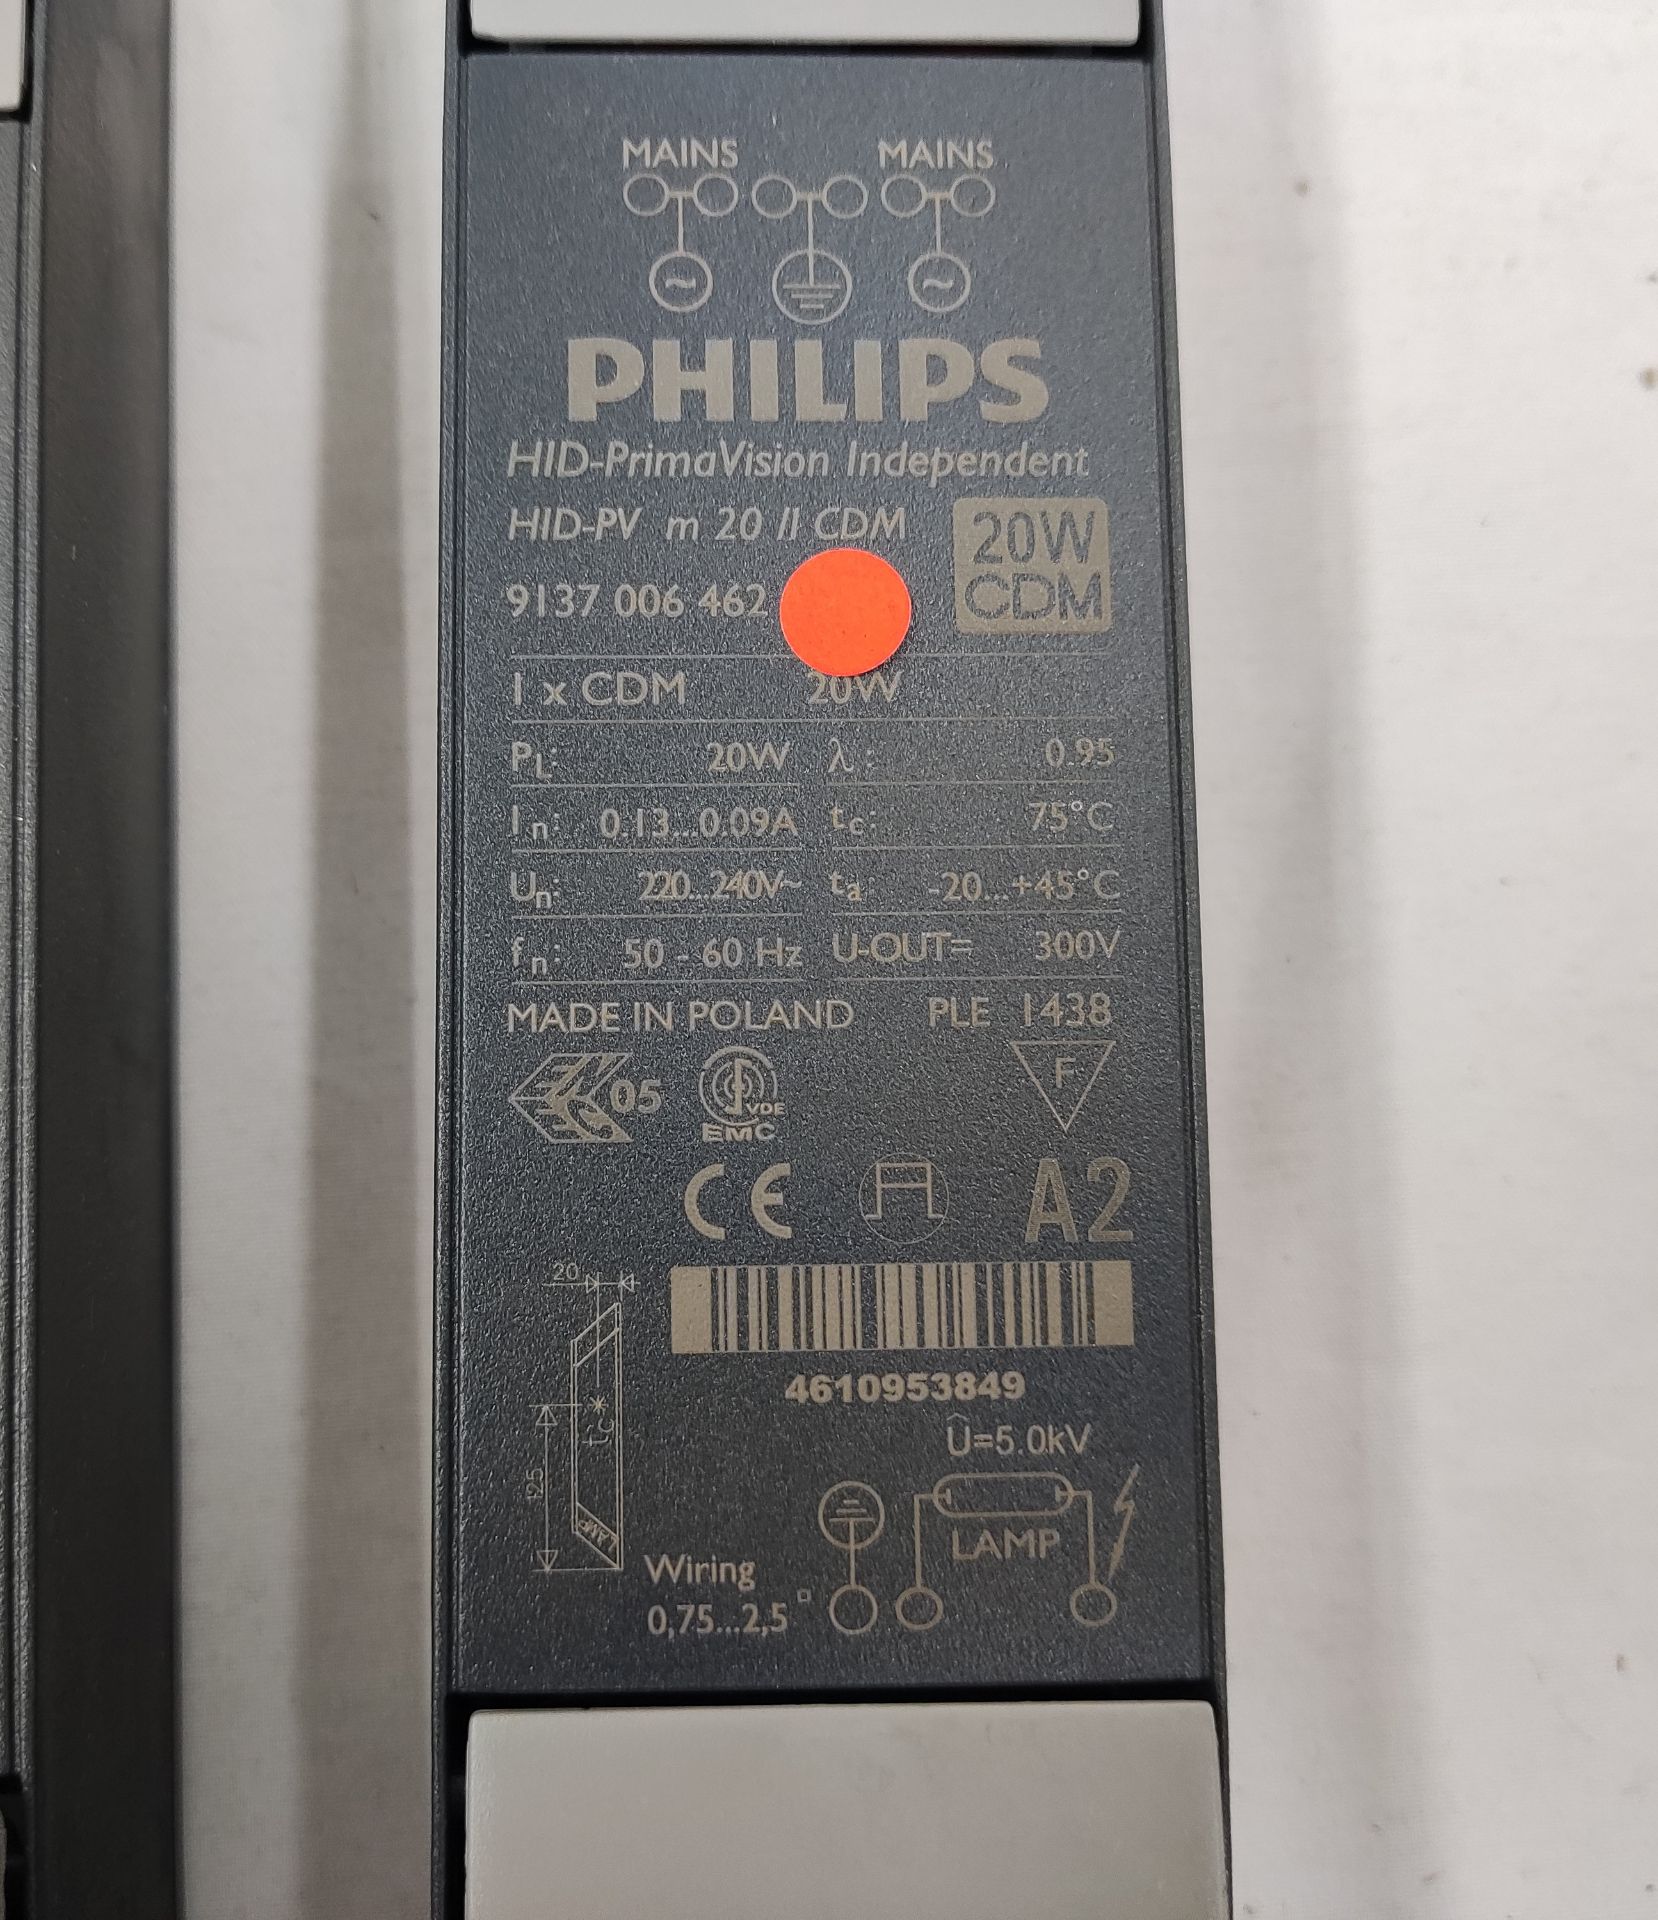 3 x PHILIPS Electronic Drivers For Hid Lamps - Hid-Pv M 20/I Cdm Hpf 220-240V 50/60Hz - Remote - Image 6 of 9